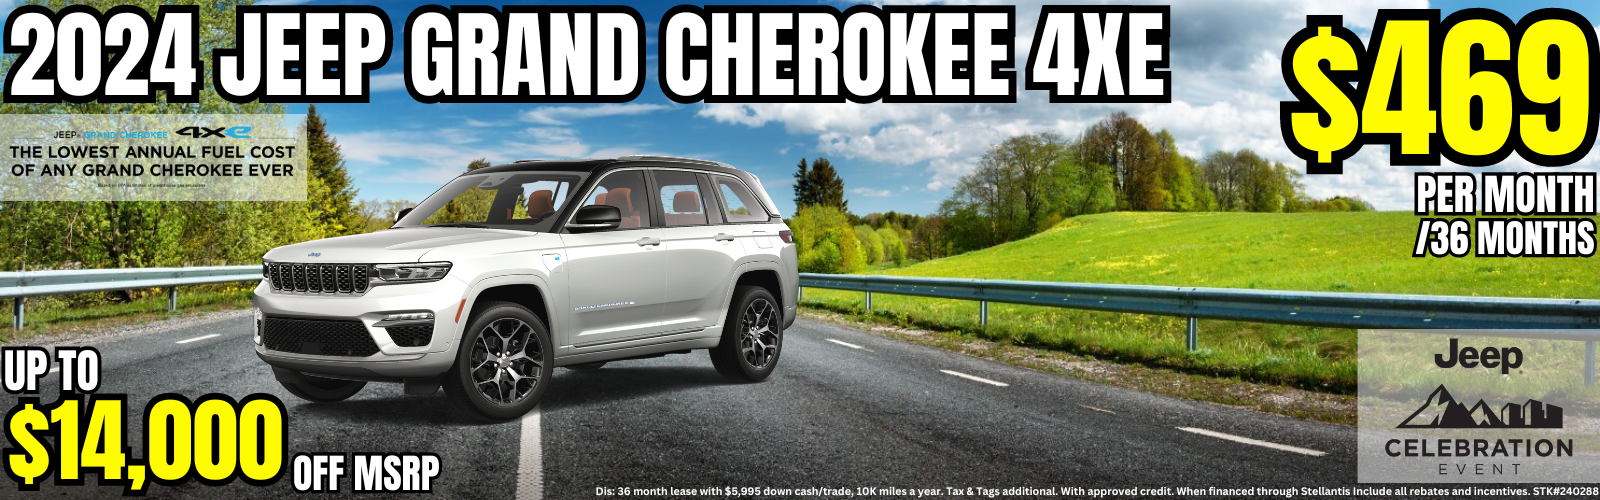 Grand Cherokee 4xe Lease Special